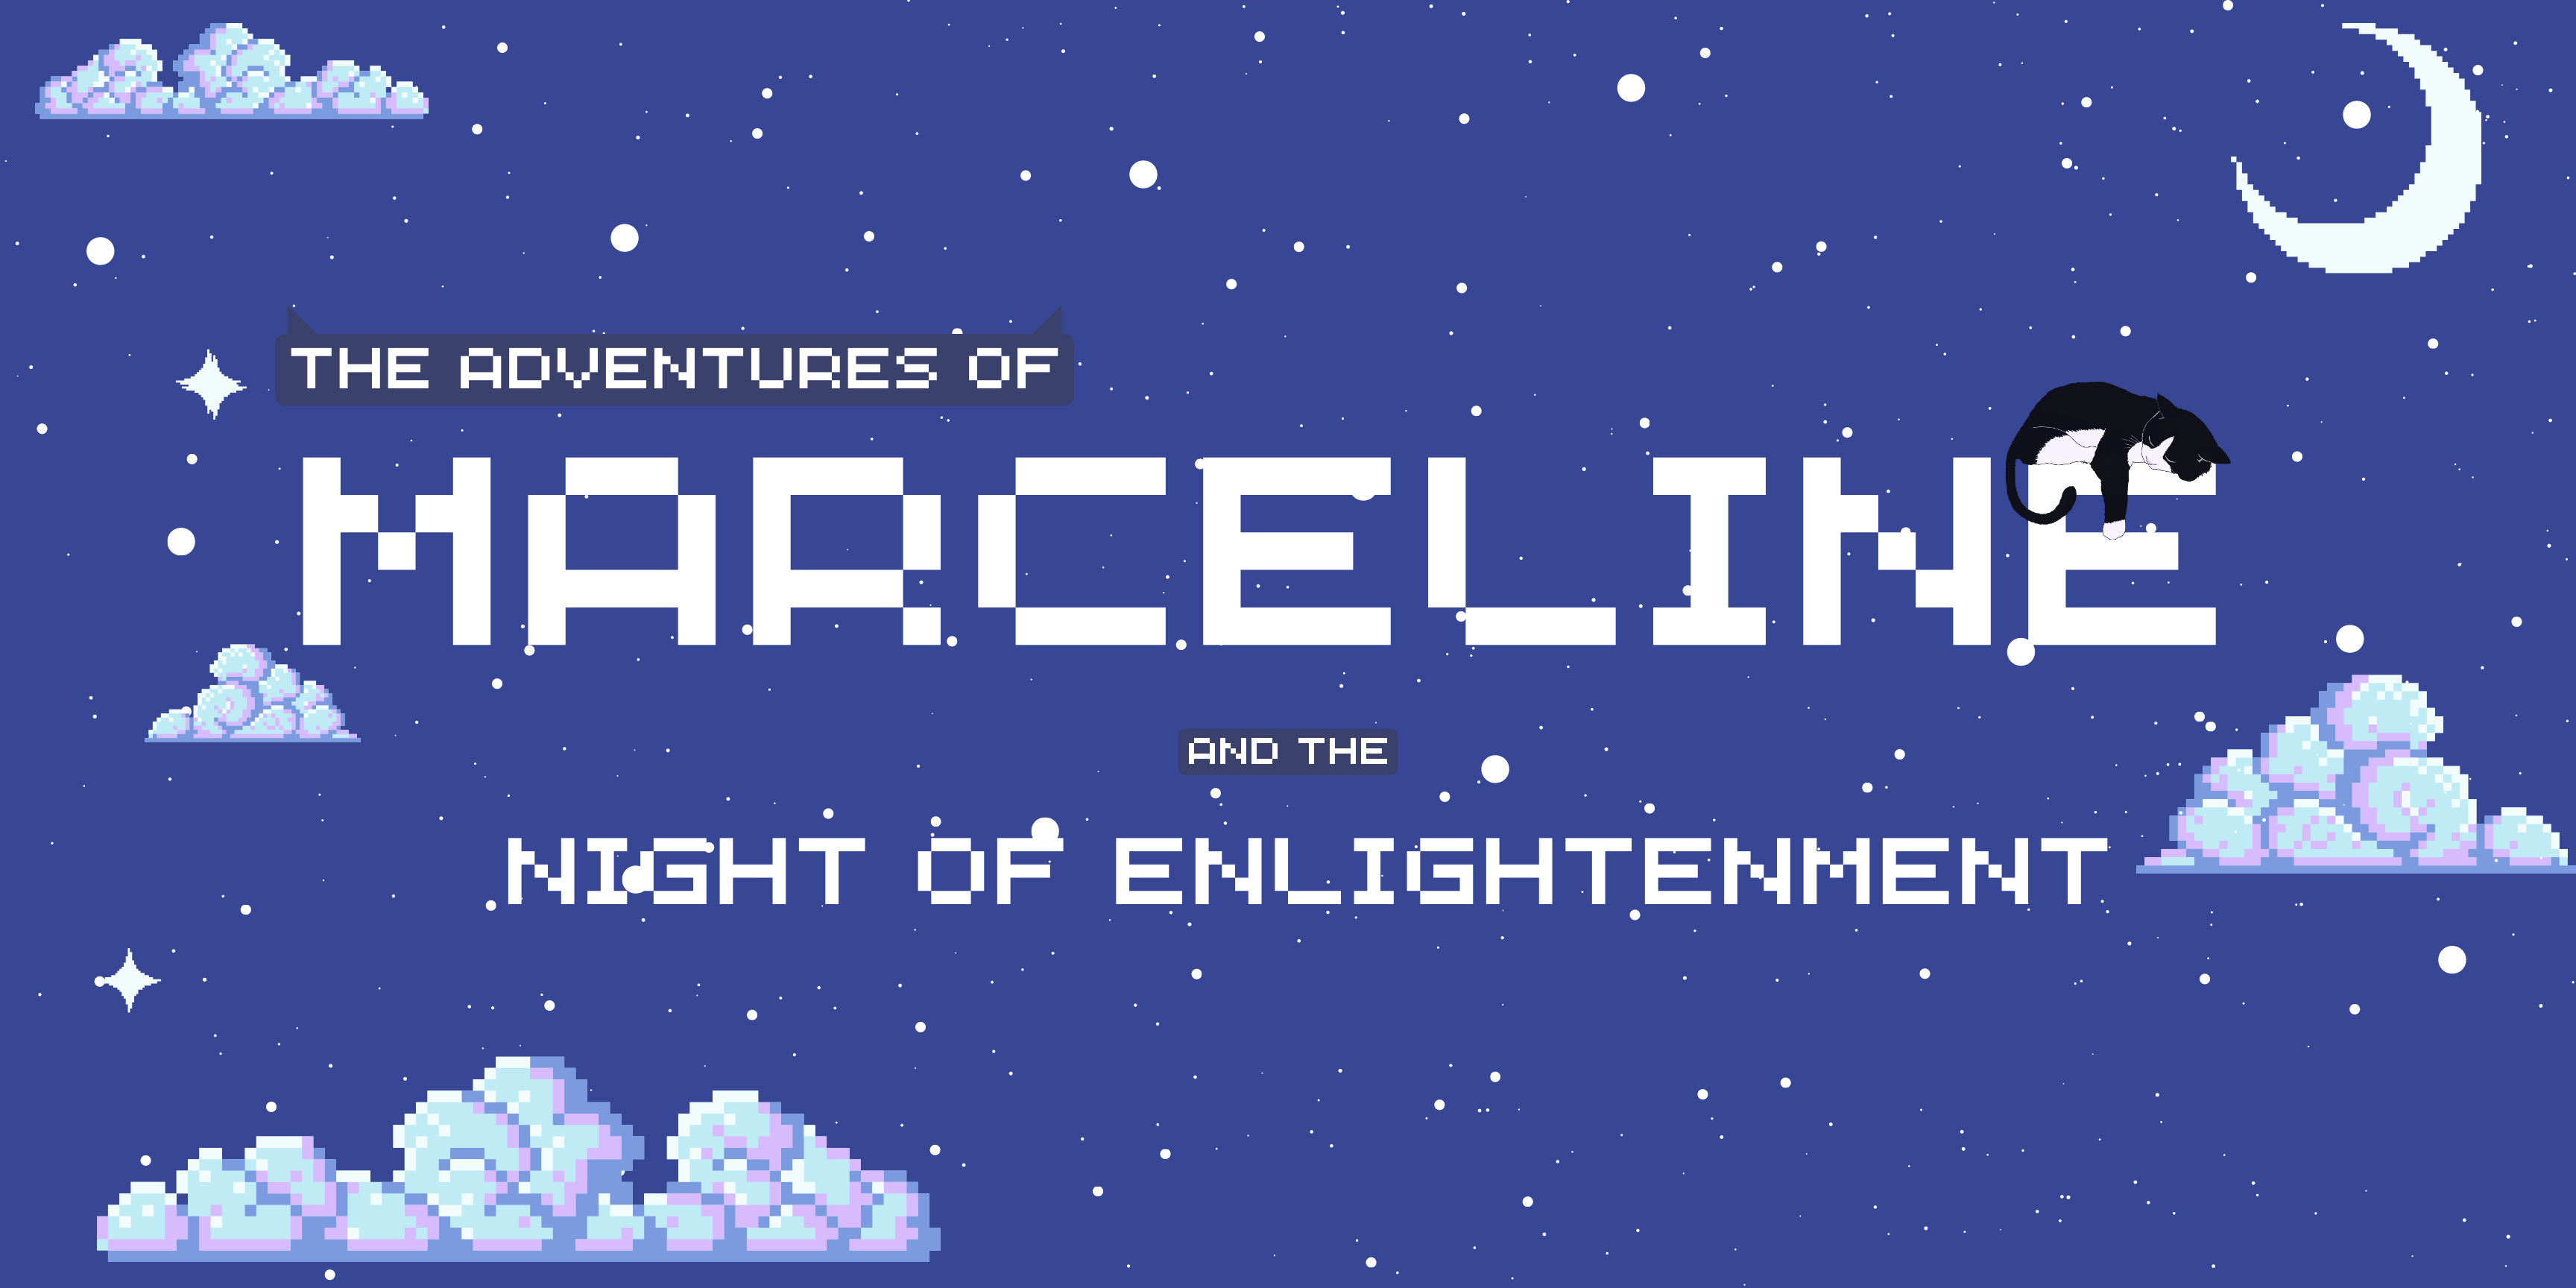 The Adventures of Marceline and the Night of Enlightenment